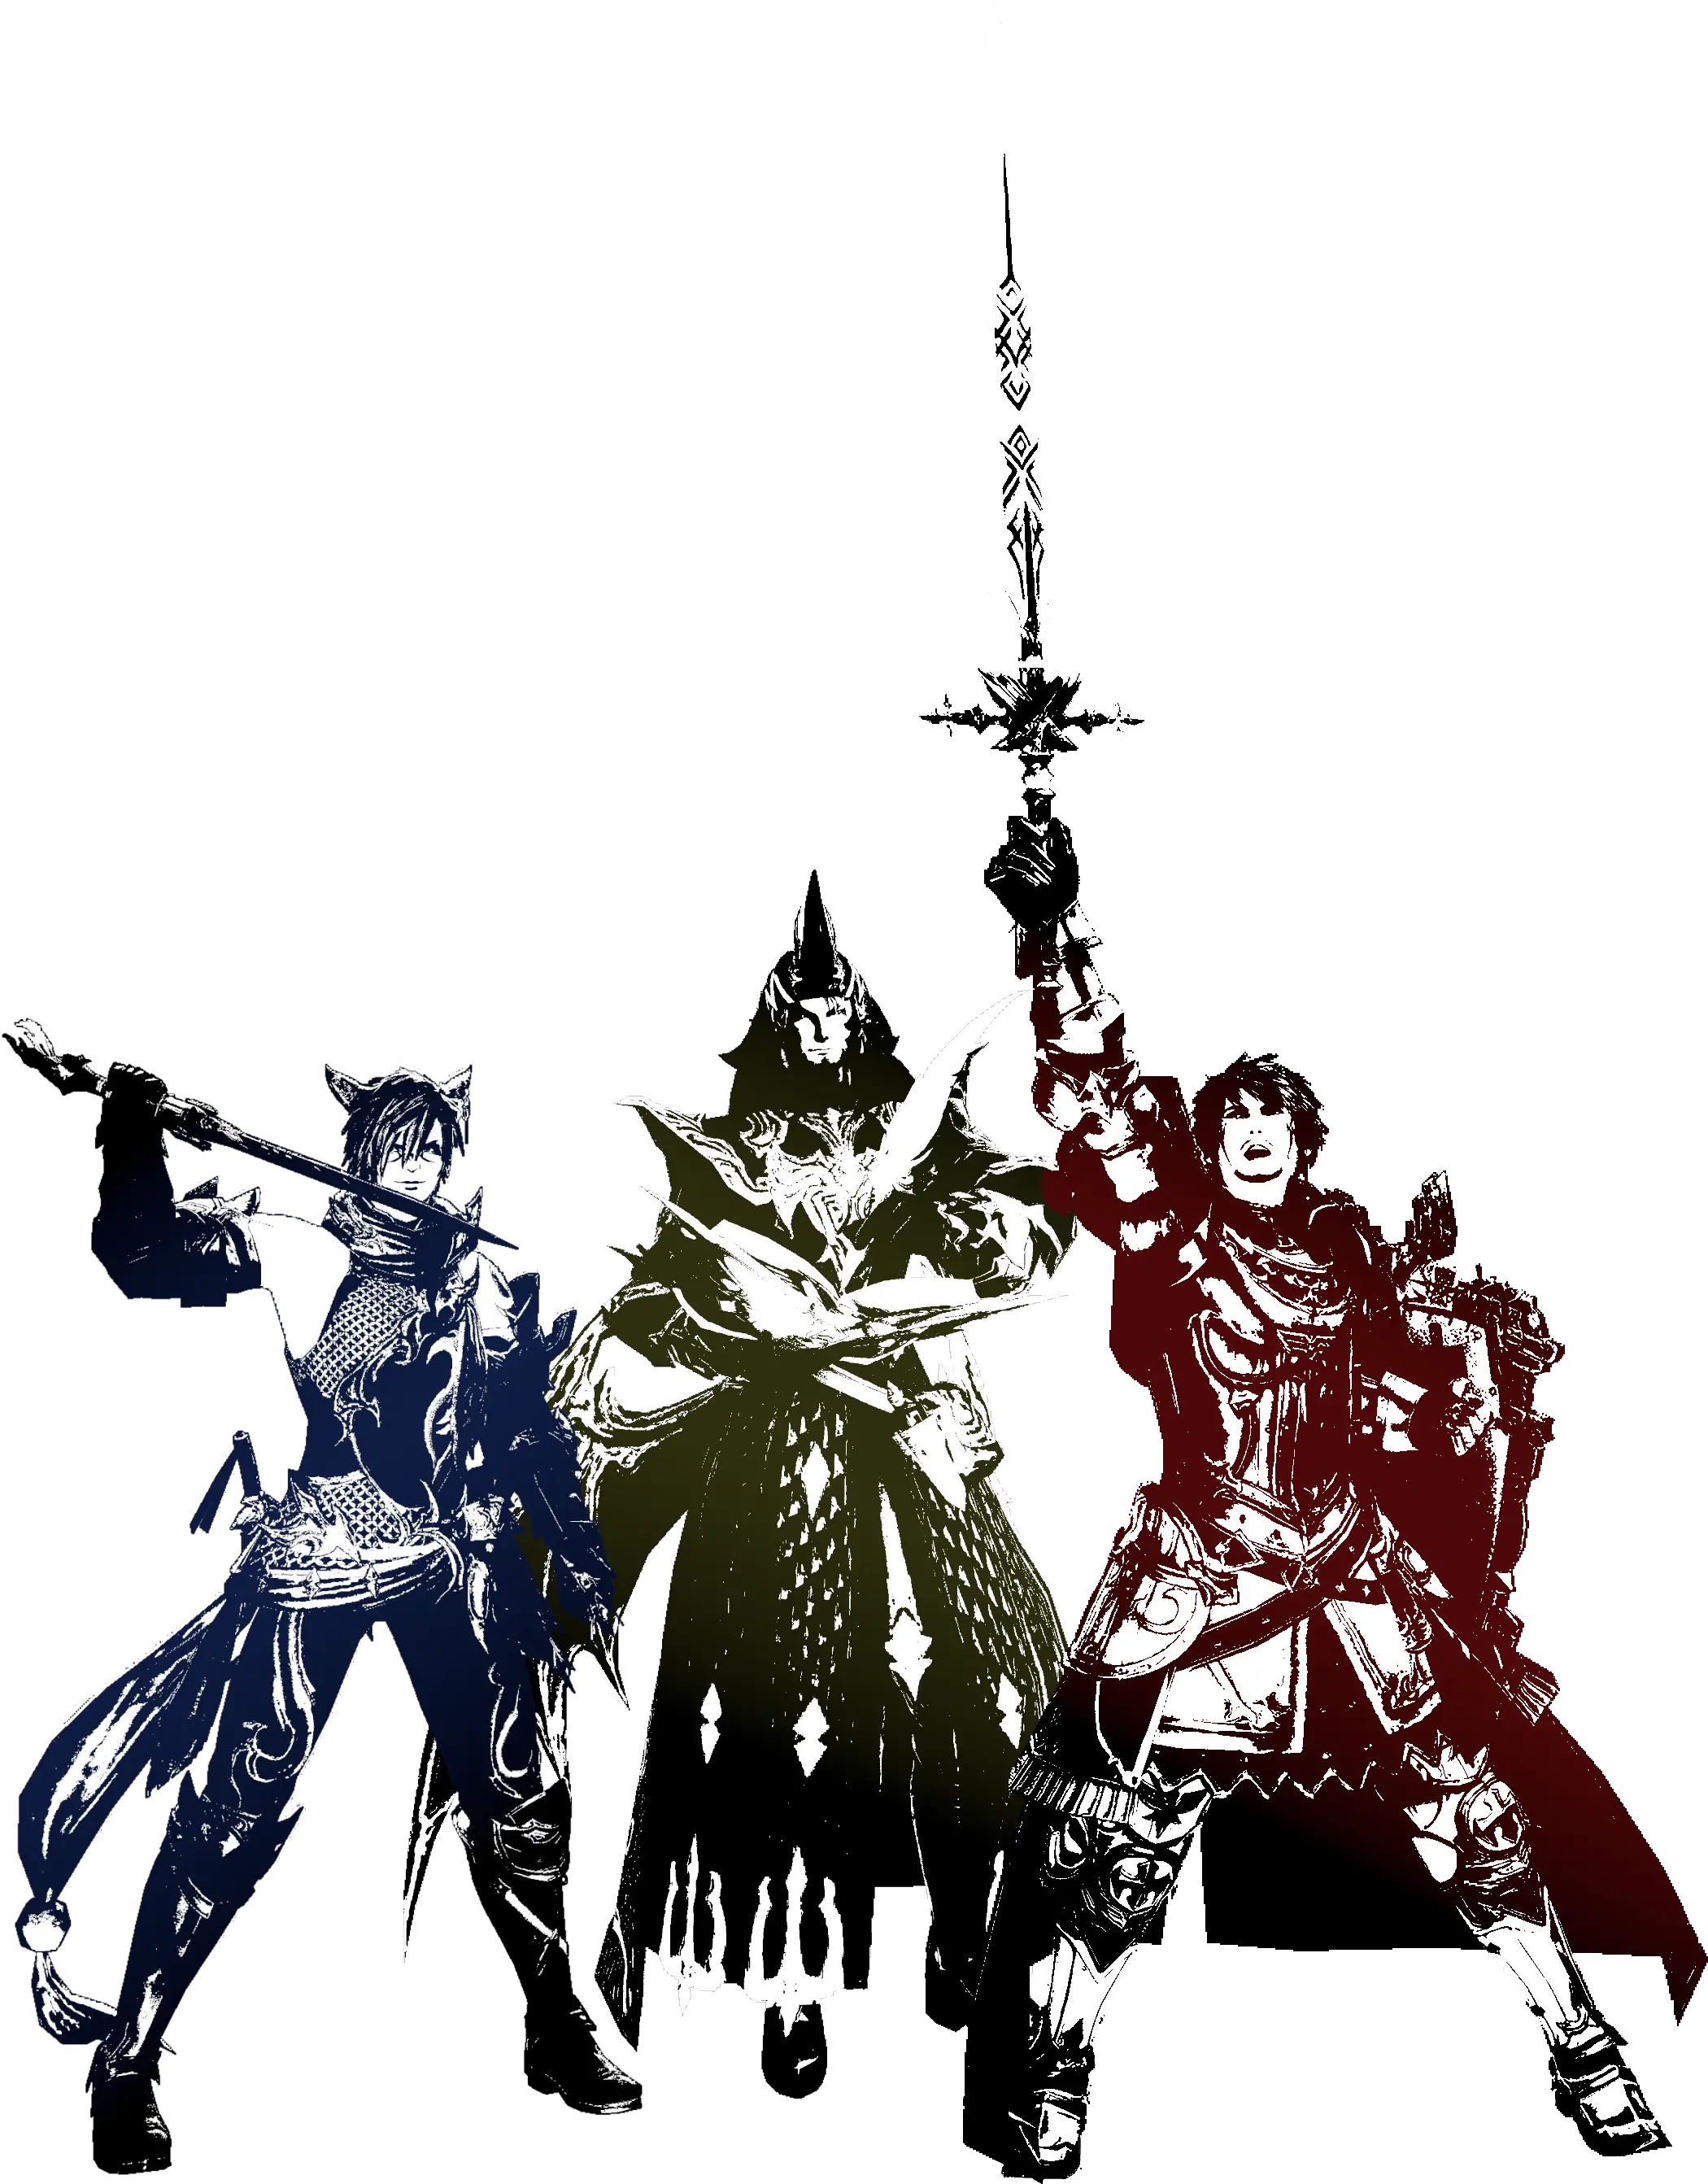 Made Ff Logocharacters For Me And Two Of My Friends Ffxiv Illustration Png Ff Logo